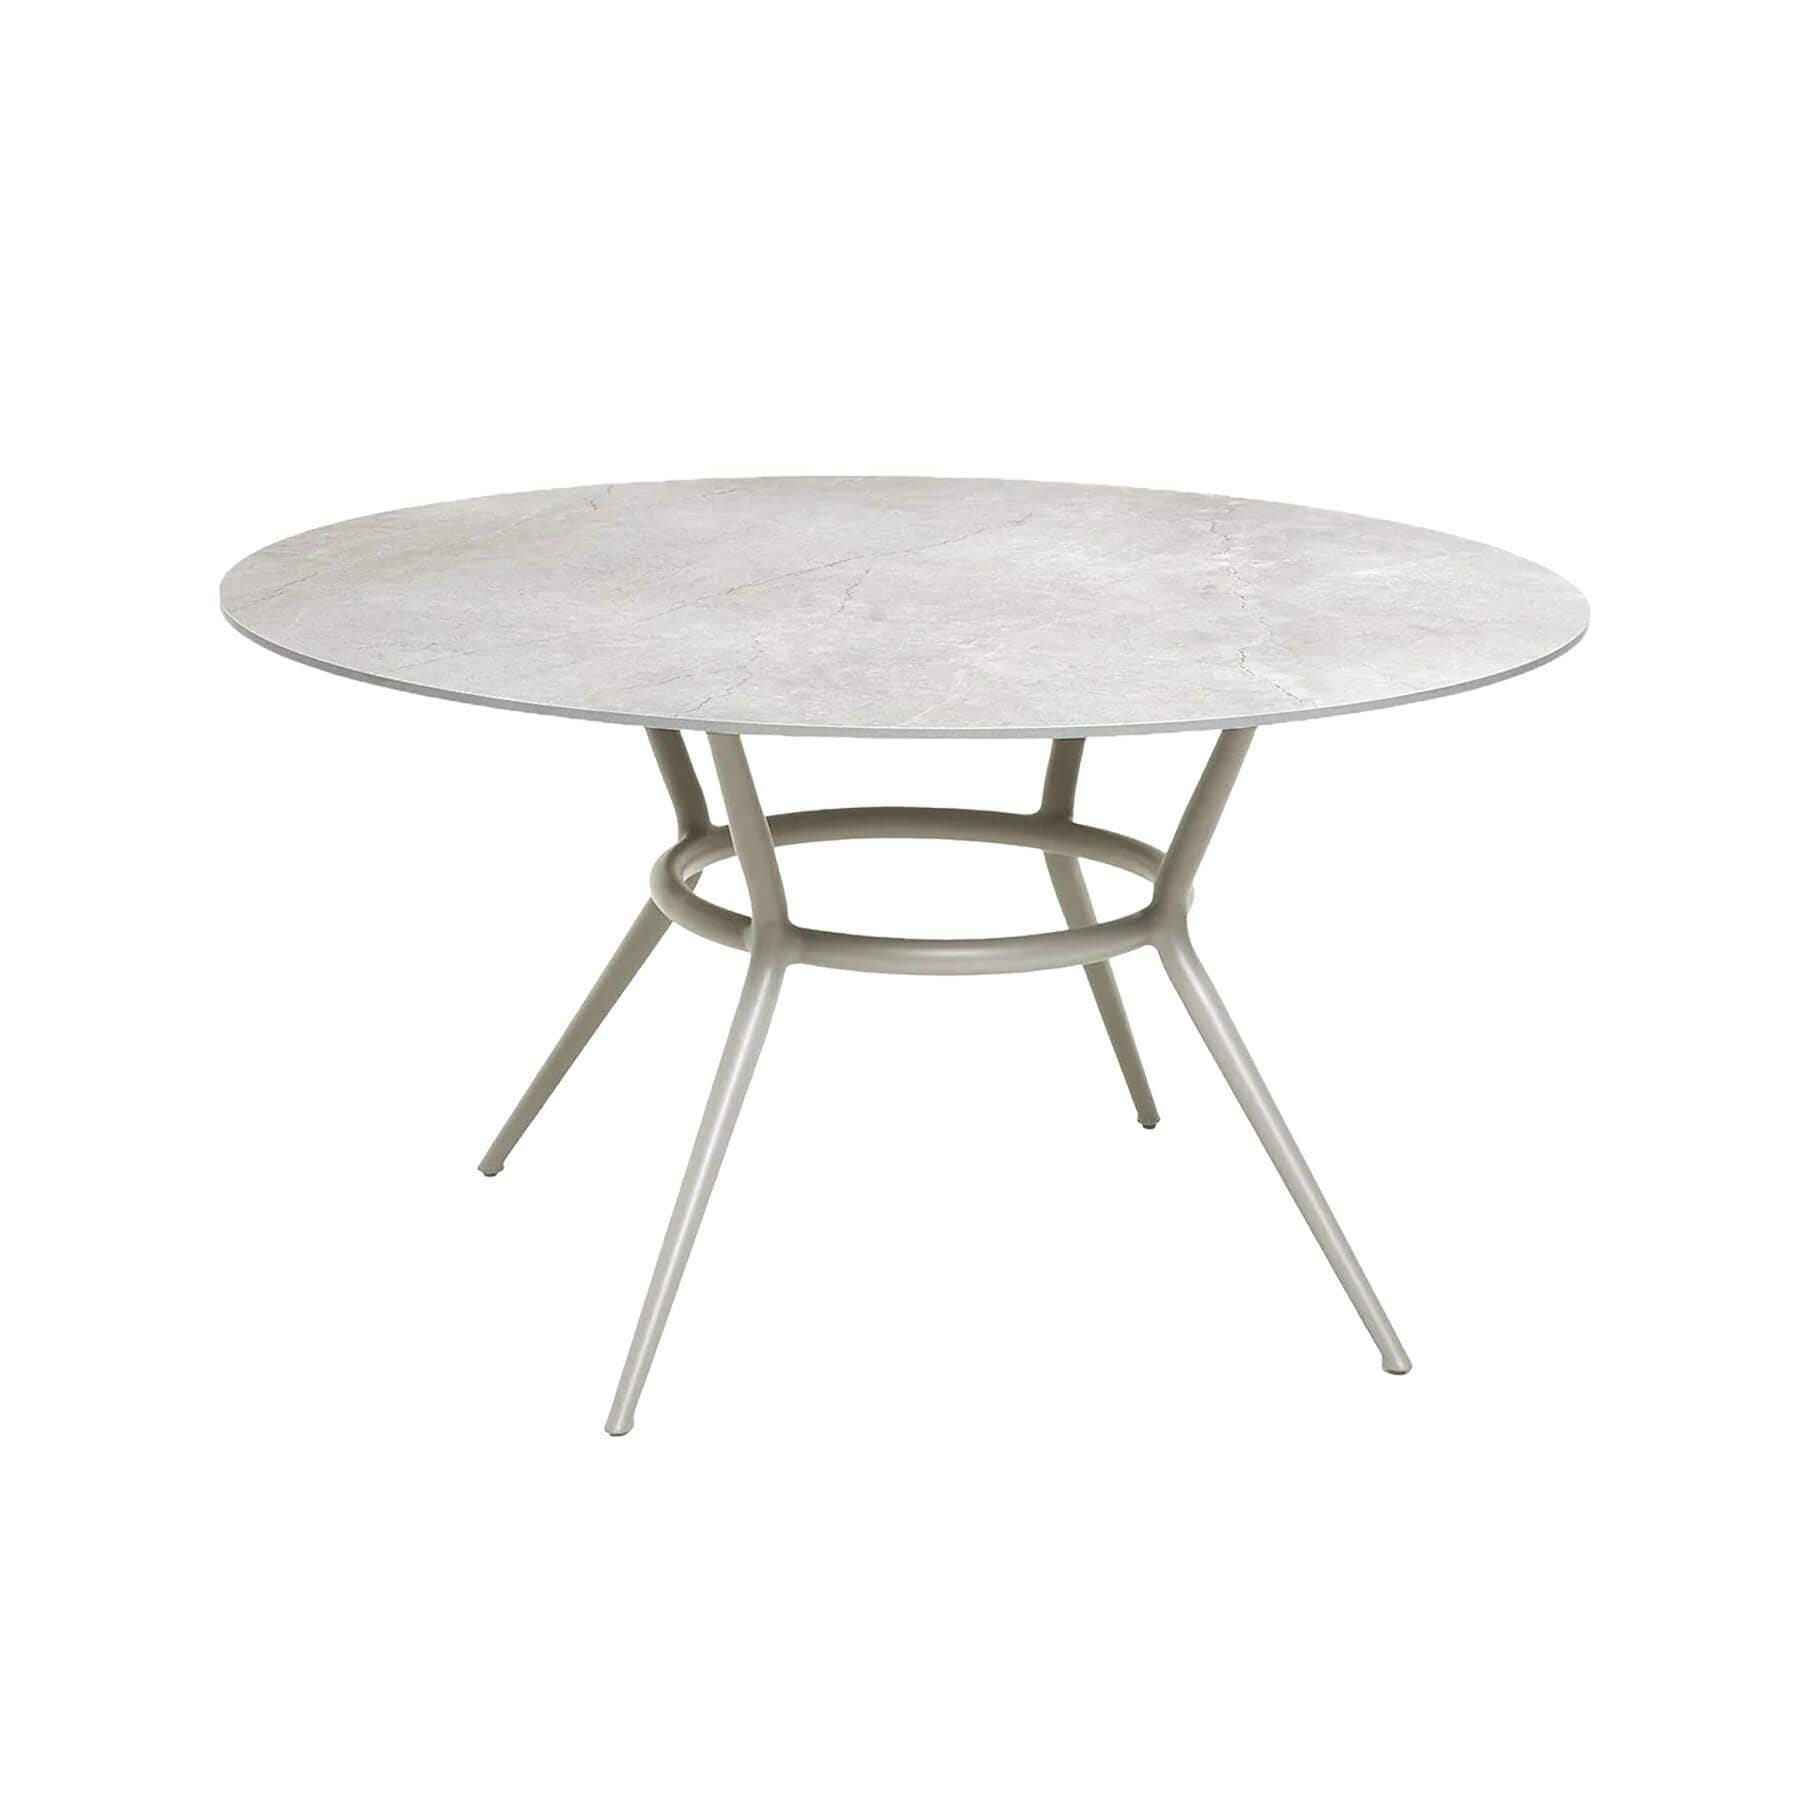 Caneline Joy Outdoor Dining Table Round Ceramic Fossil Grey Top Taupe Legs